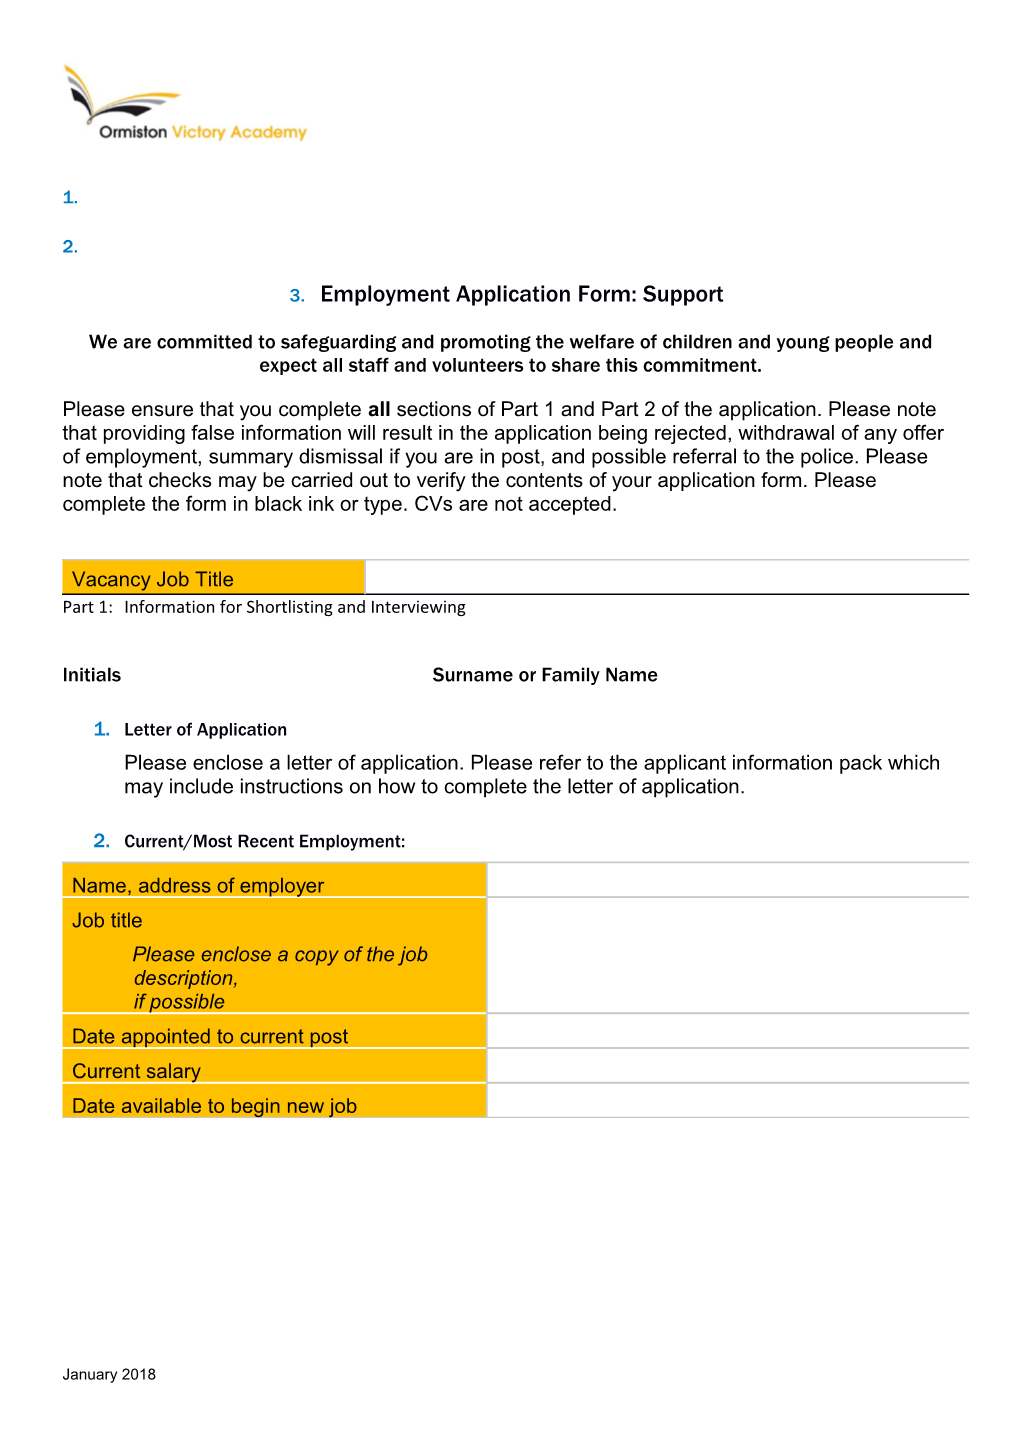 Employment Application Form: Support